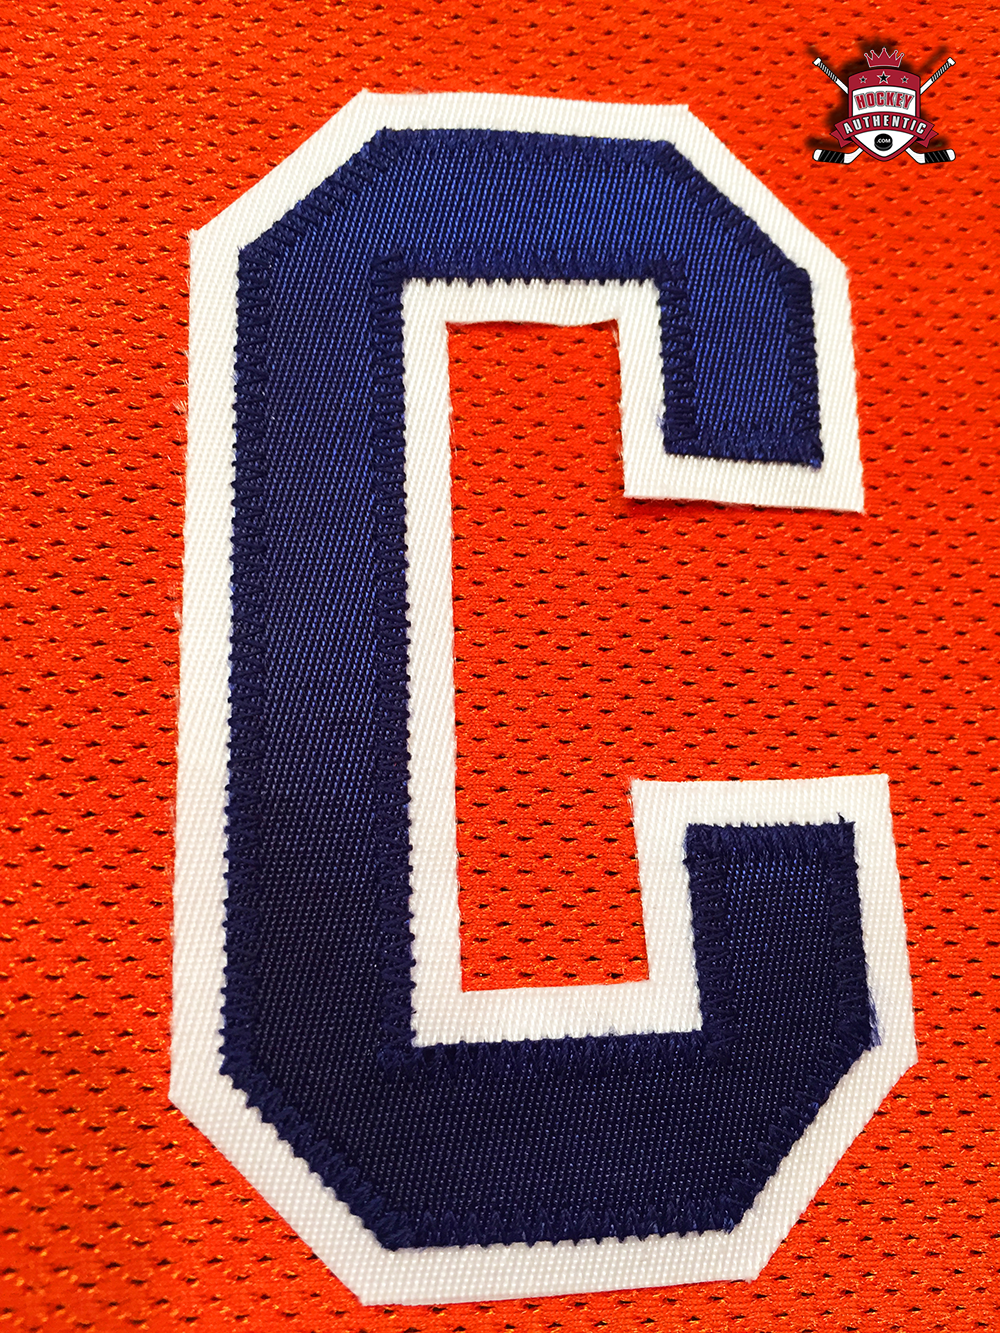 oilers 3rd jersey 2015